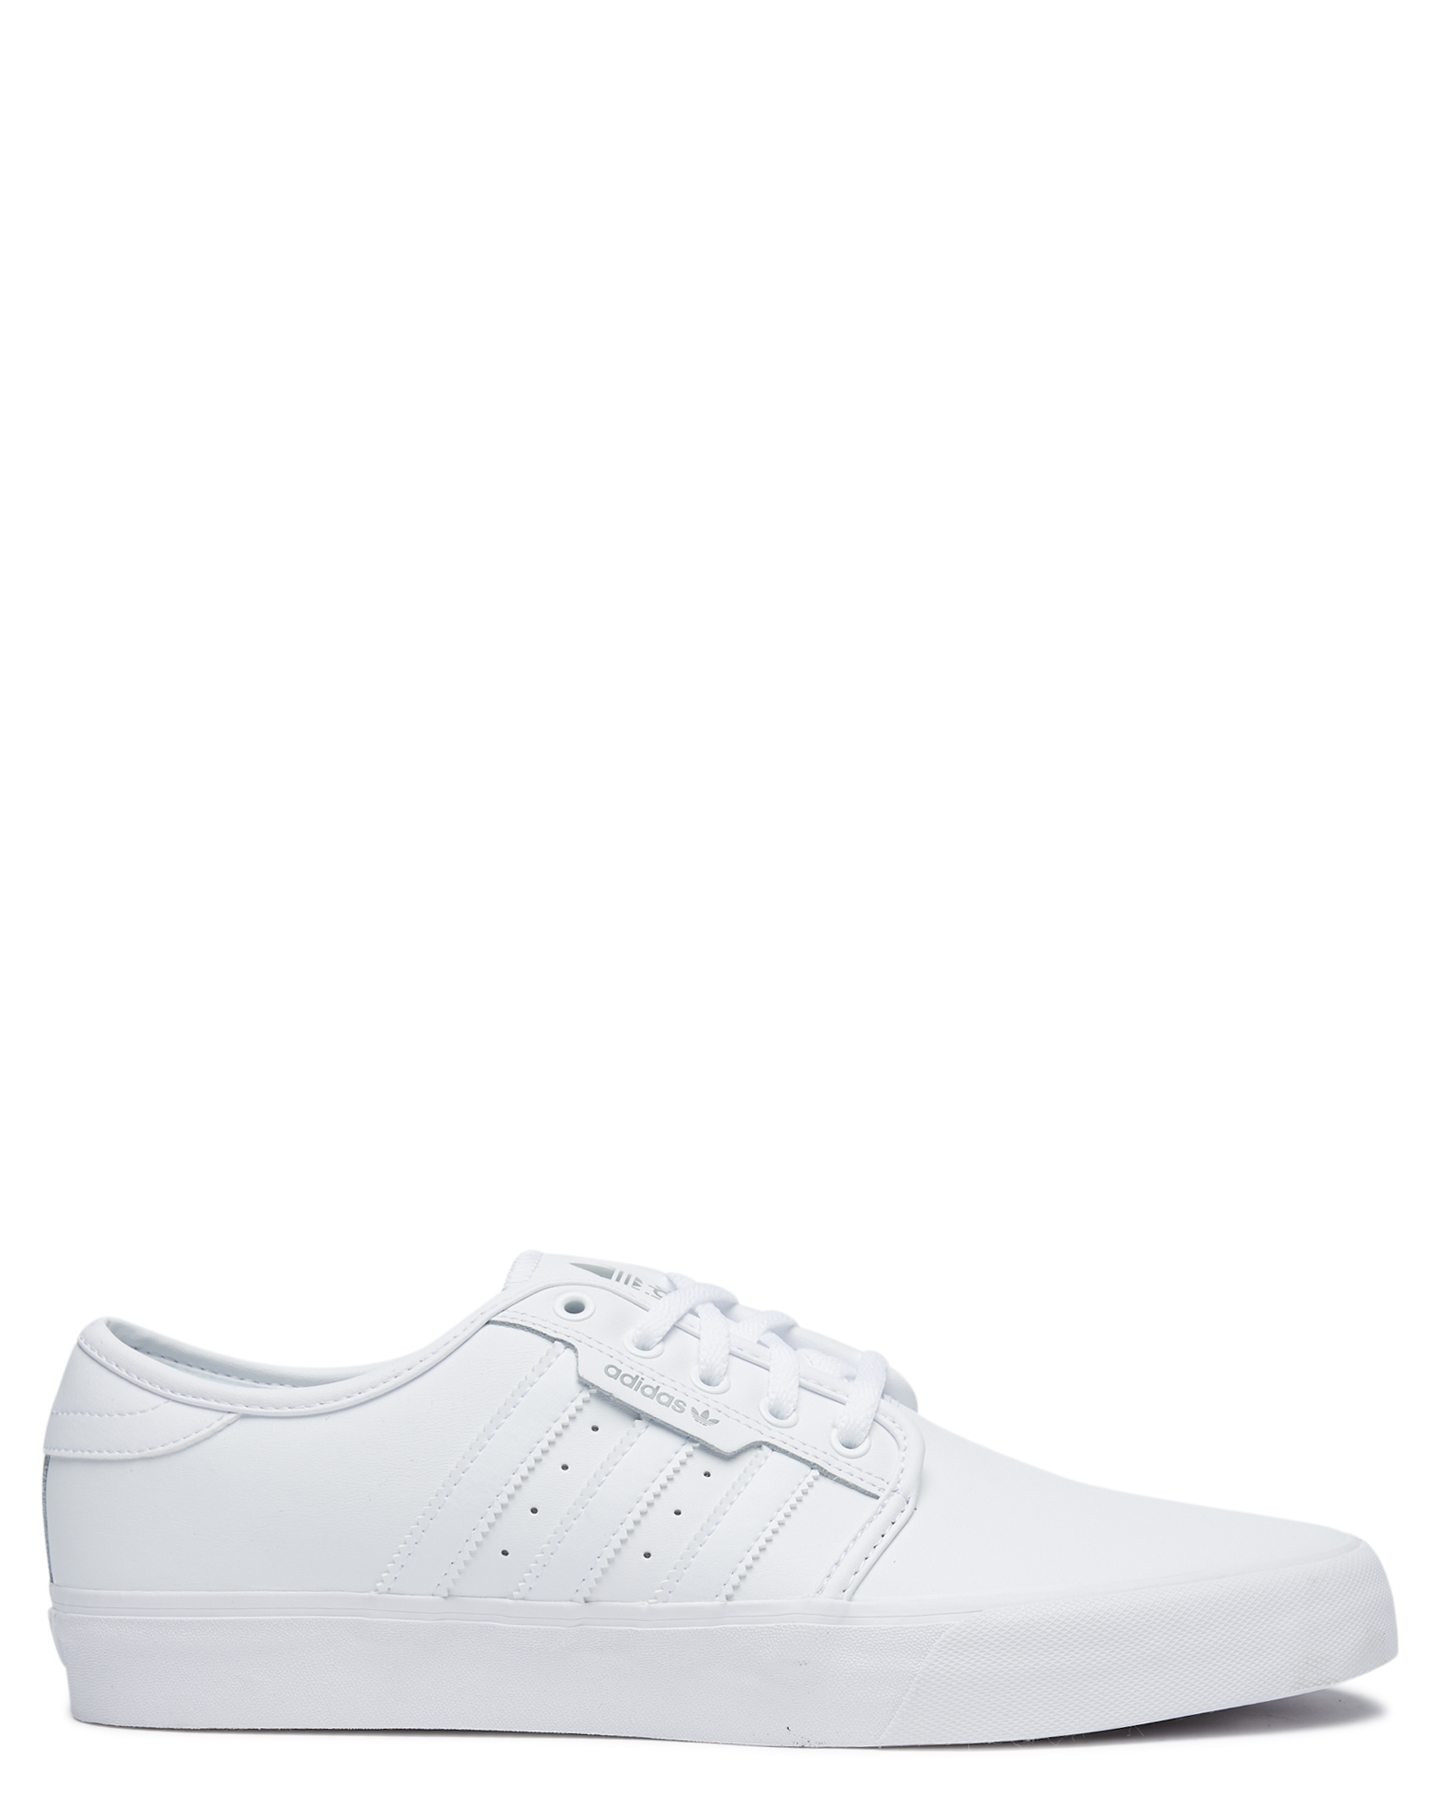 white leather adidas sneakers